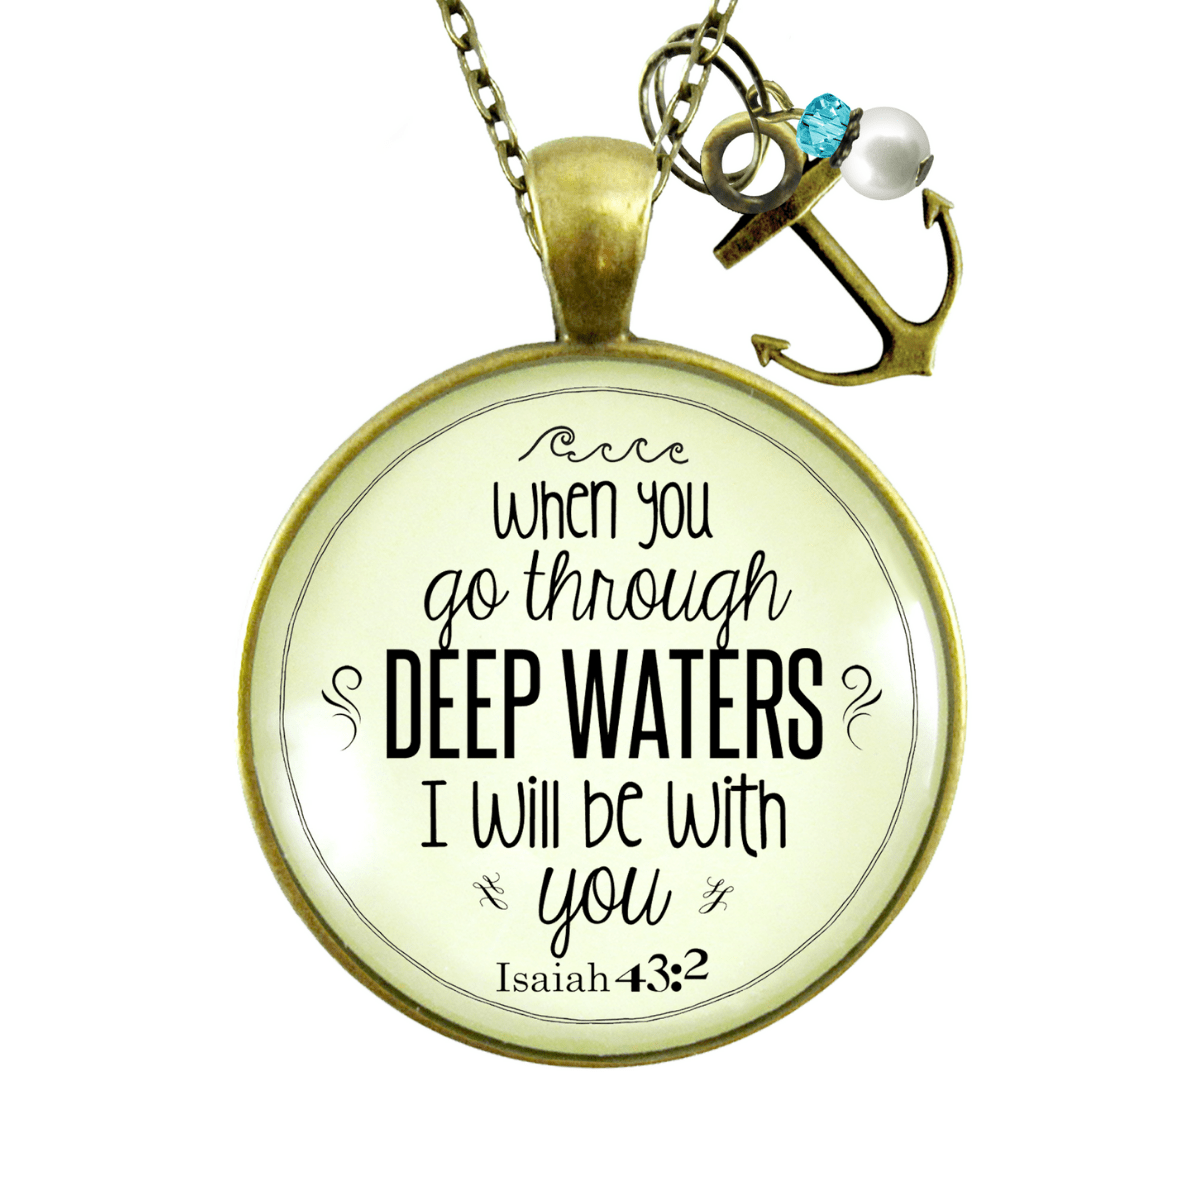 Gutsy Goodness Faith Necklace Go Through Deep Waters Encouragement Scripture Jewelry - Gutsy Goodness;Faith Necklace Go Through Deep Waters Encouragement Scripture Jewelry - Gutsy Goodness Handmade Jewelry Gifts